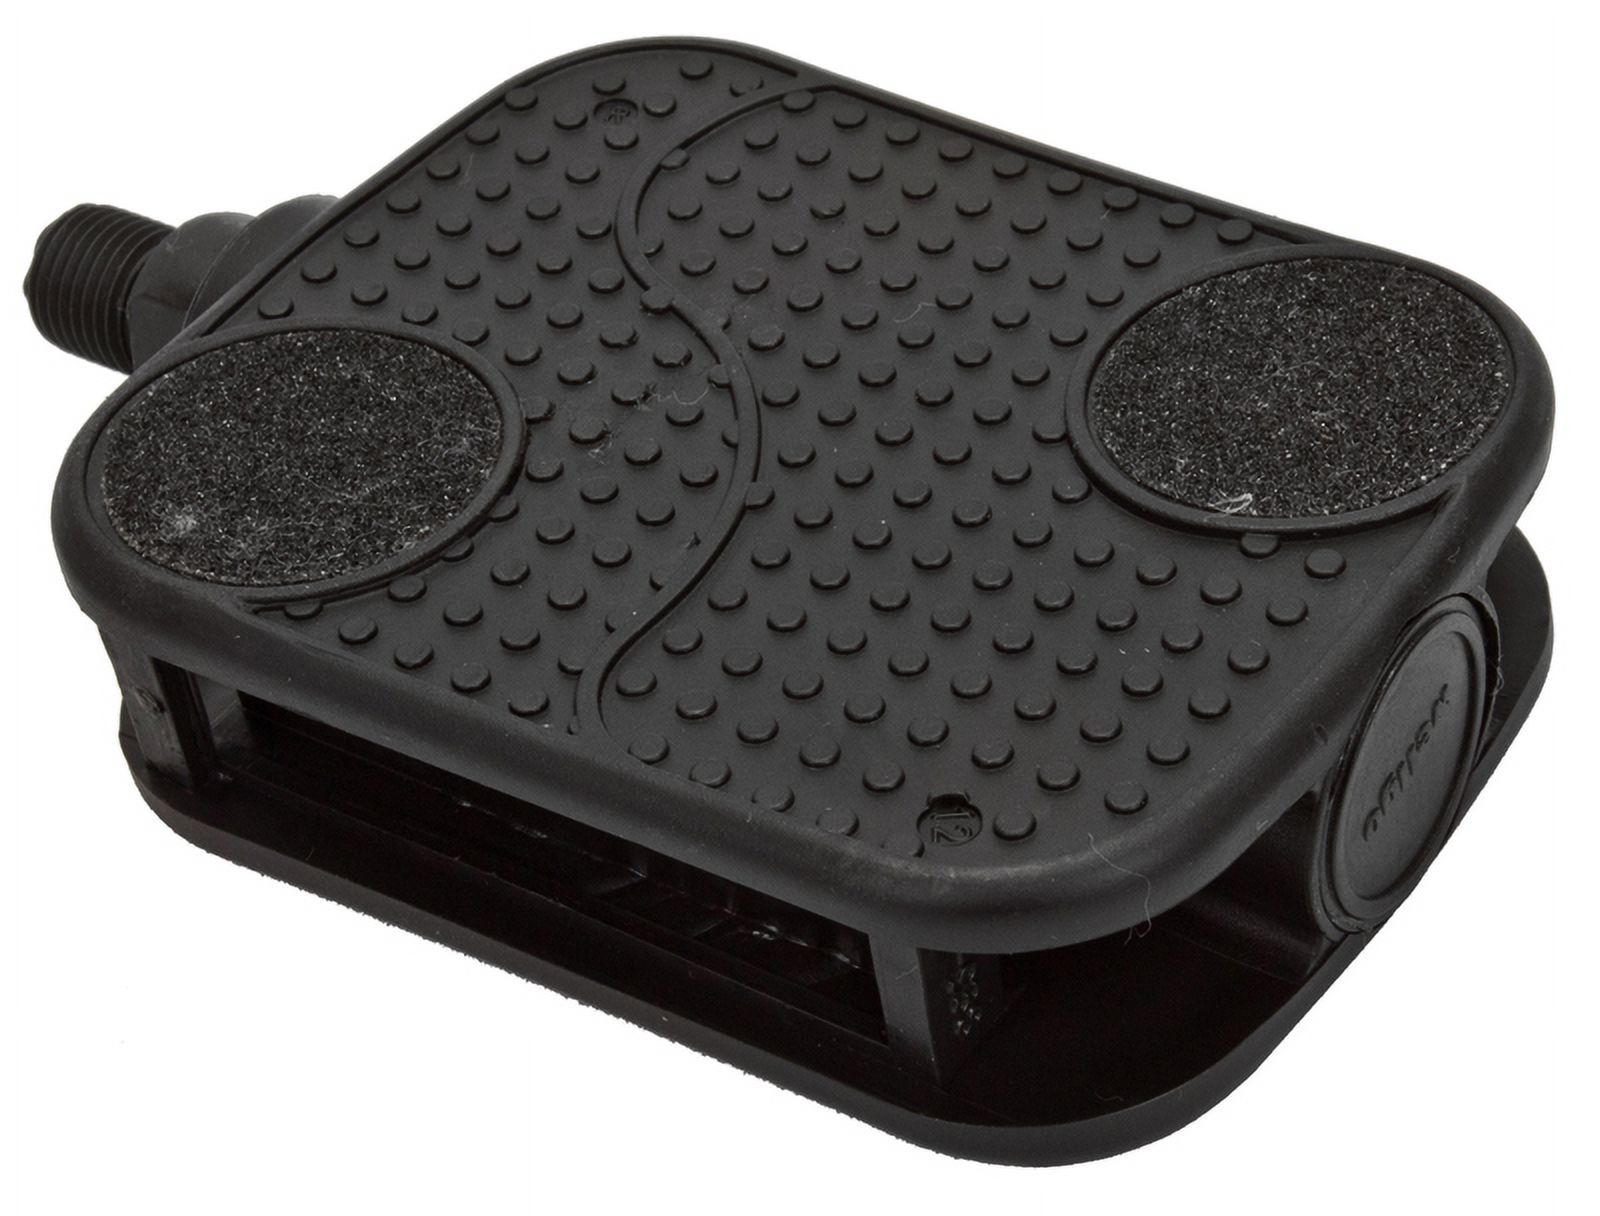 SUNLITE Barefoot Cruiser 1/2" Black Bicycle Pedals - image 2 of 2